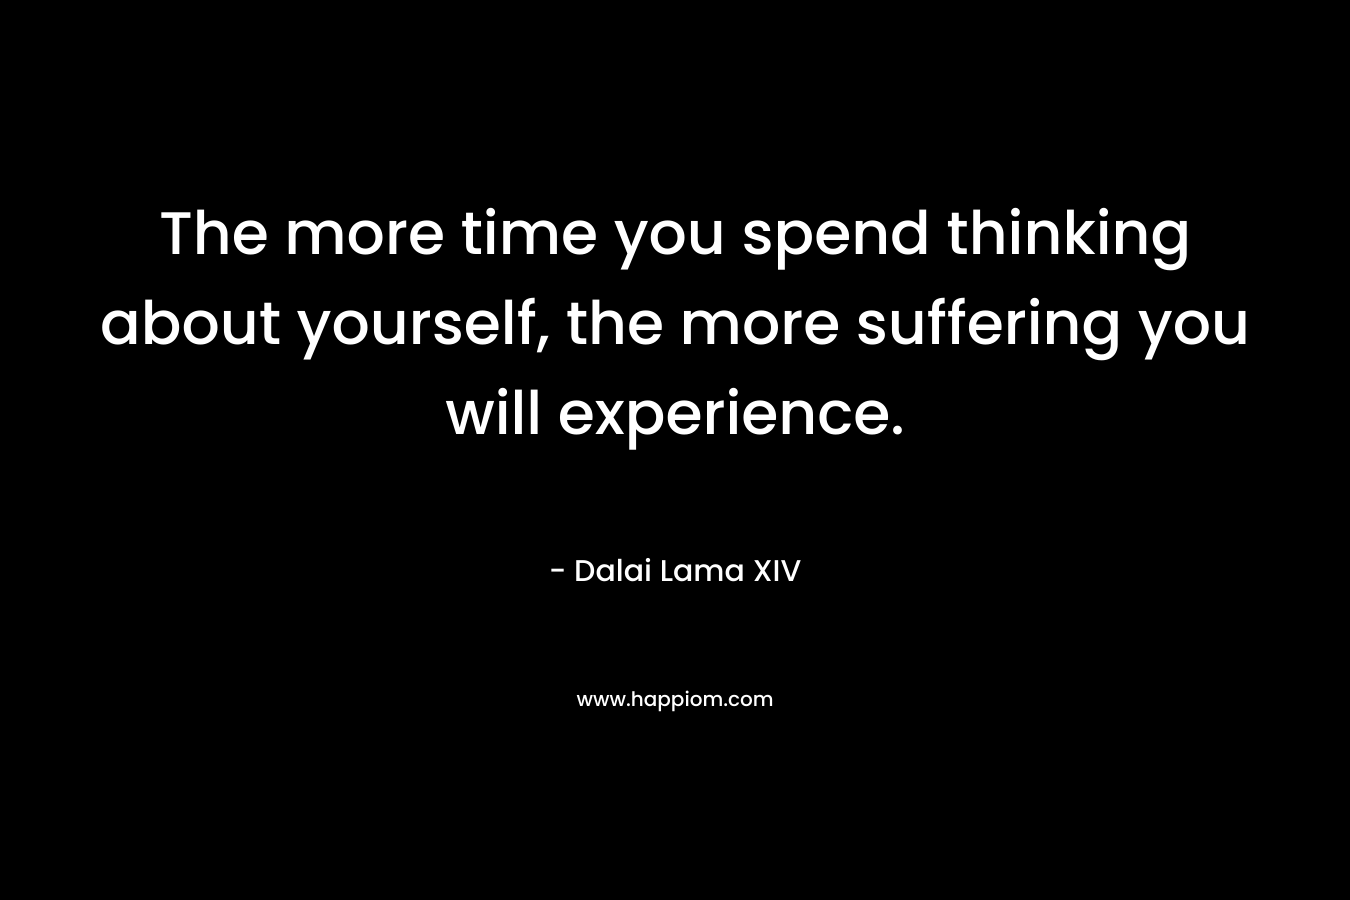 The more time you spend thinking about yourself, the more suffering you will experience.